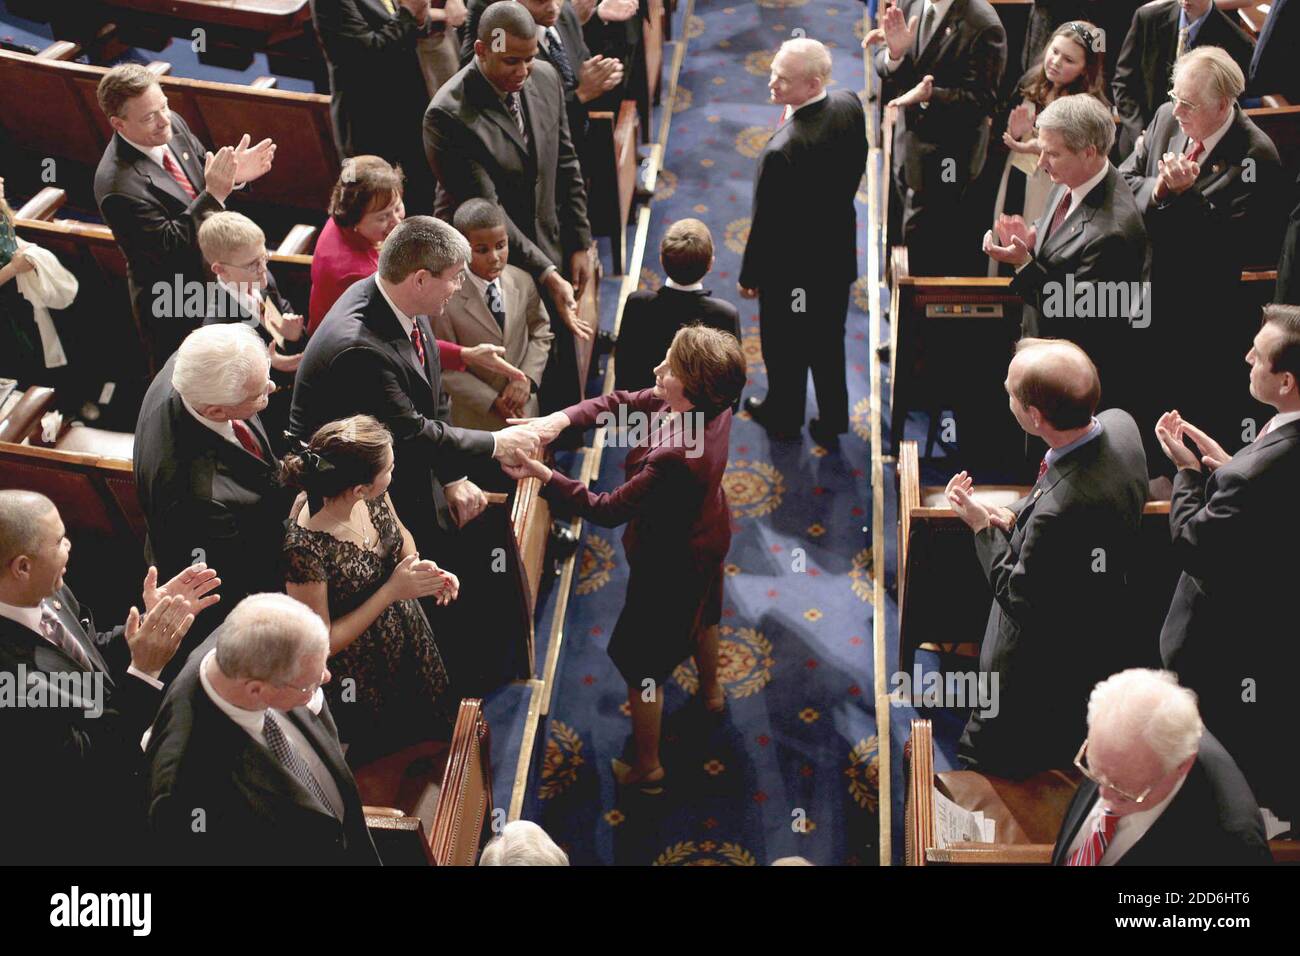 NO FILM, NO VIDEO, NO TV, NO DOCUMENTARY - The new Speaker of the House Nancy Pelosi (D-CA) walks into the chamber after being introduced to receive the Speaker's gavel on the first day of the 110th Congress on January 4, 2006, in Washington, DC, US. Photo by Chuck Kennedy/MCT/ABACAPRESS.COM Stock Photo